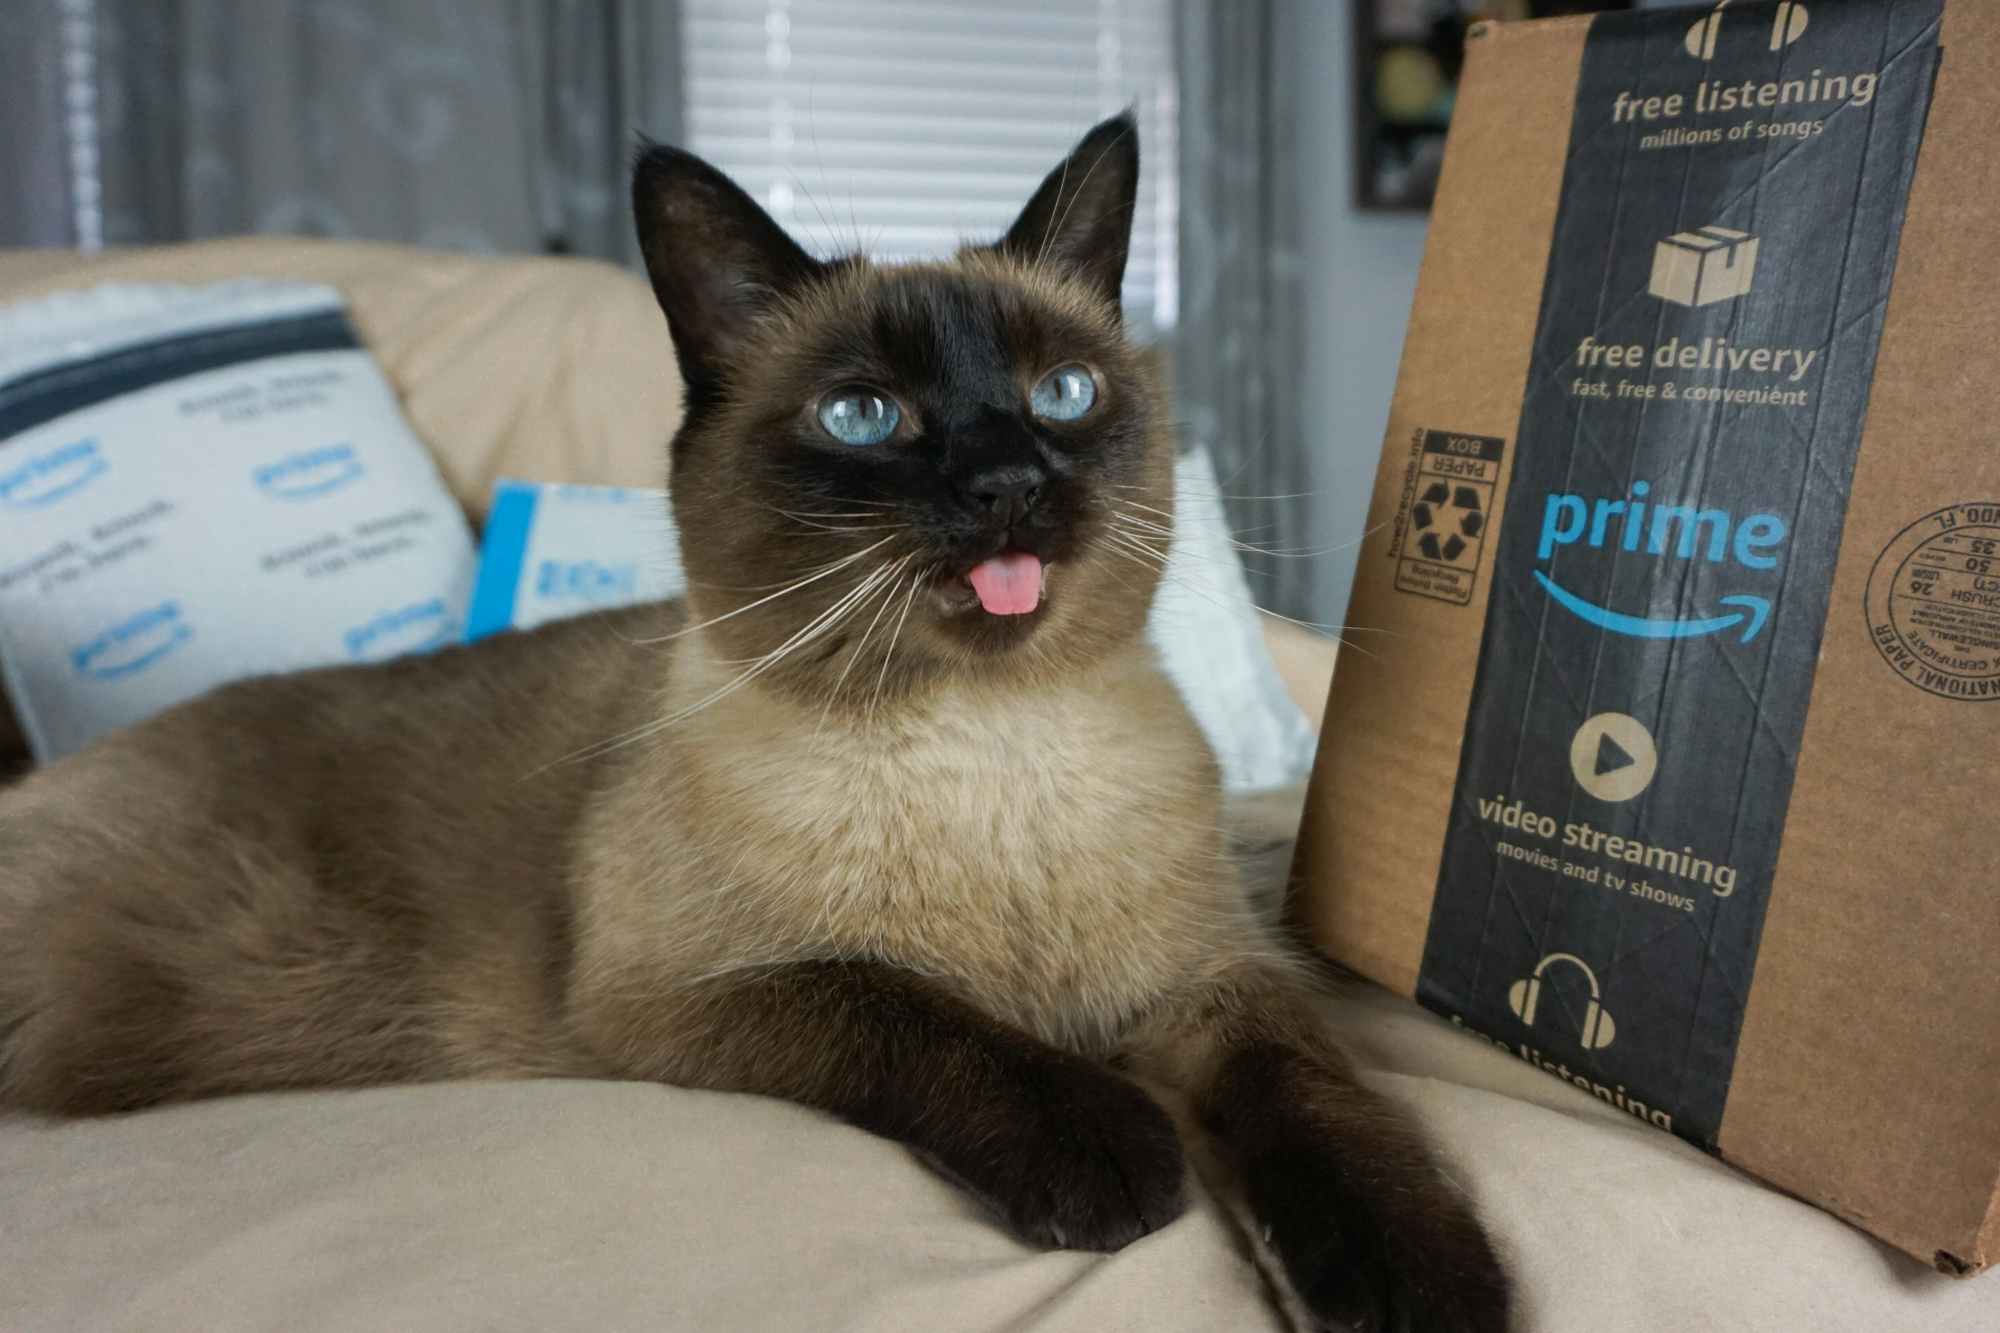 A cat with bright blue eyes sticking out her tongue and laying on a bed with some Amazon packages